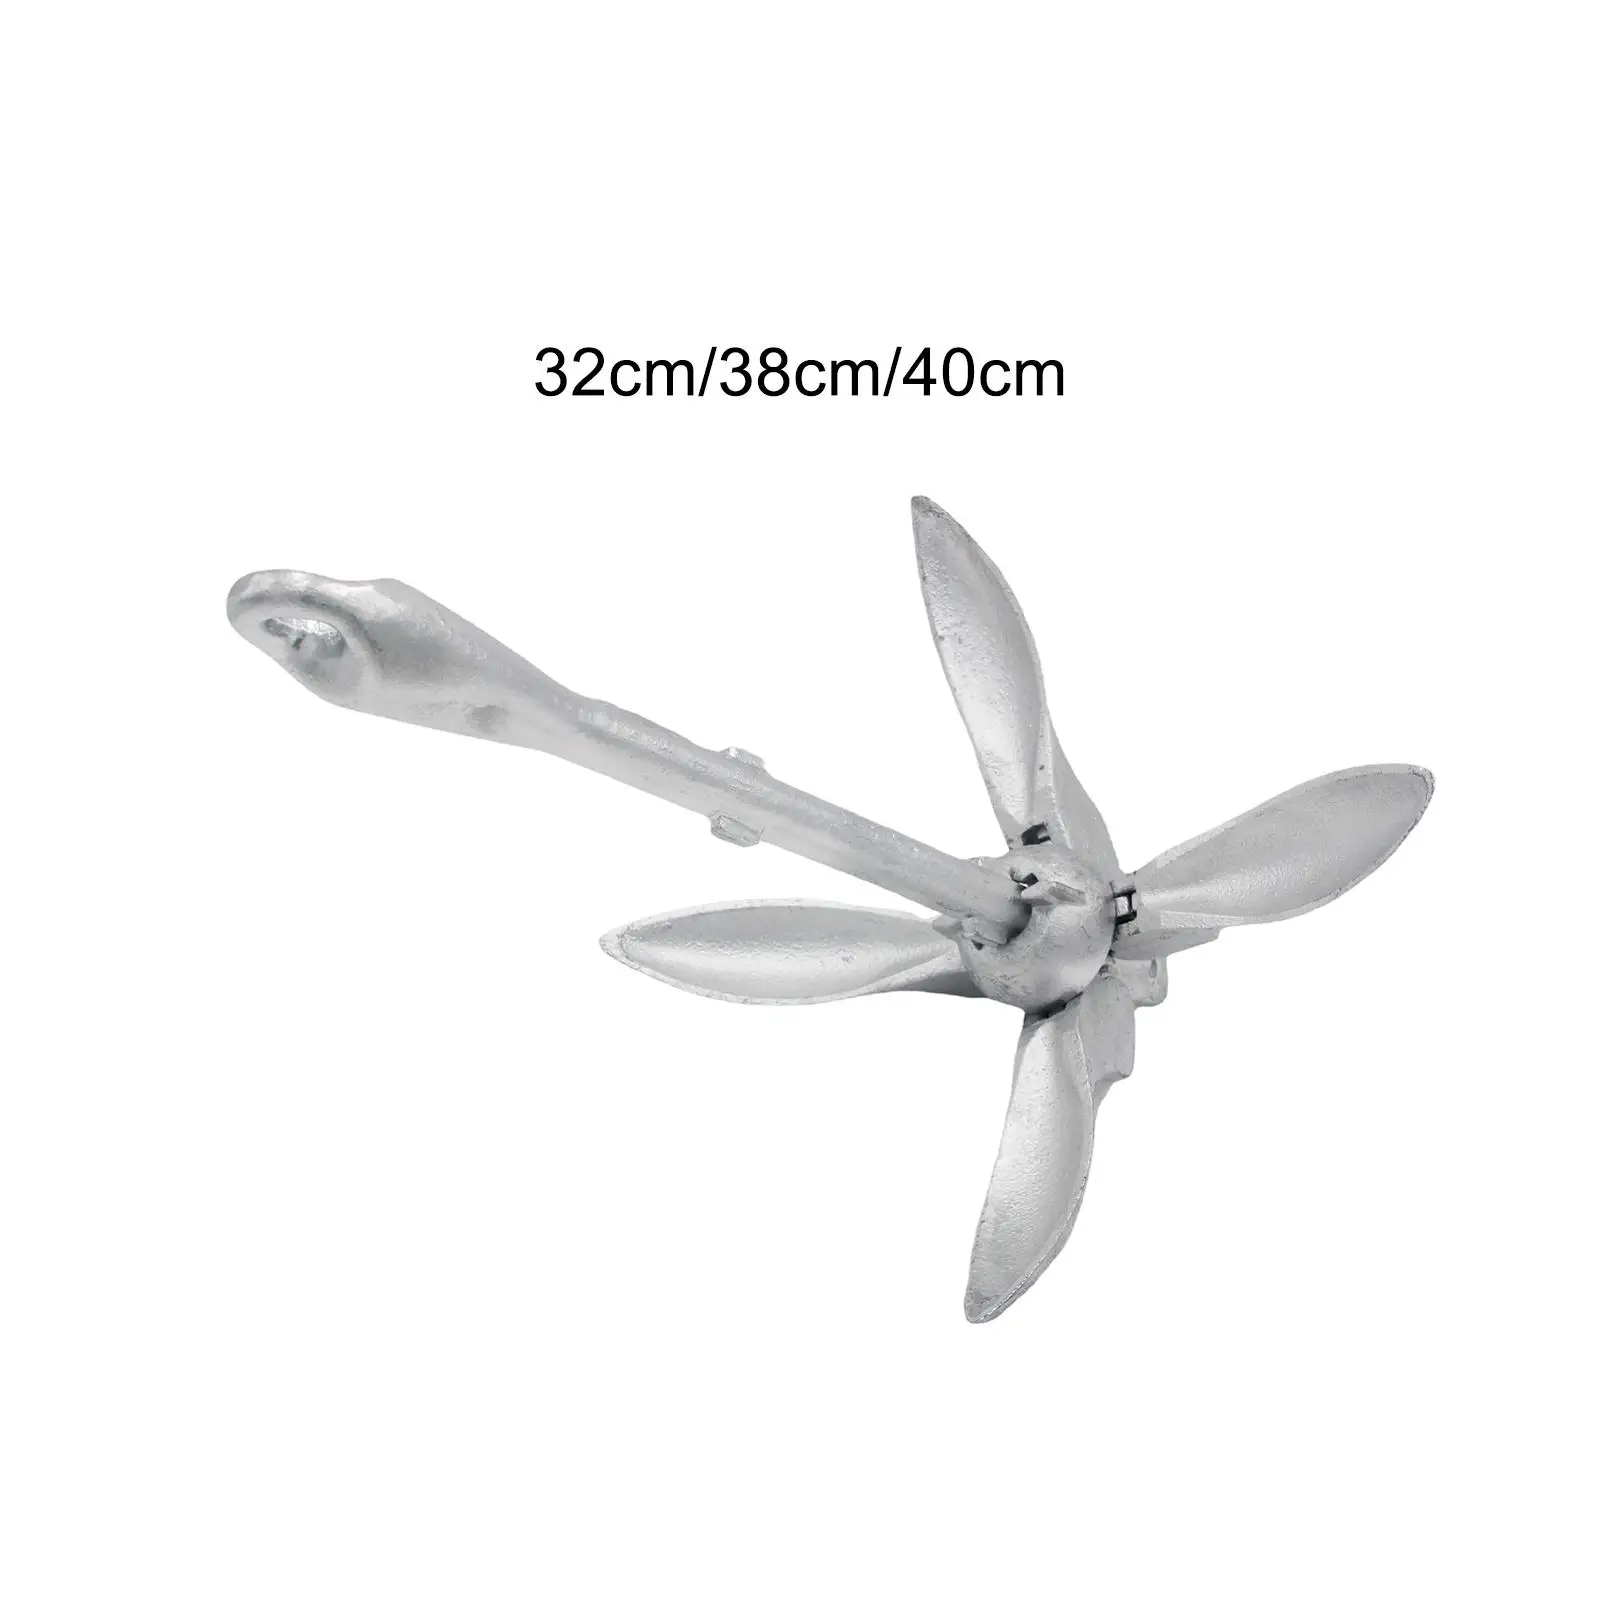 Foldable Grapnel Boat Anchor Heavy Duty for Sailboat Waterski Dinghies